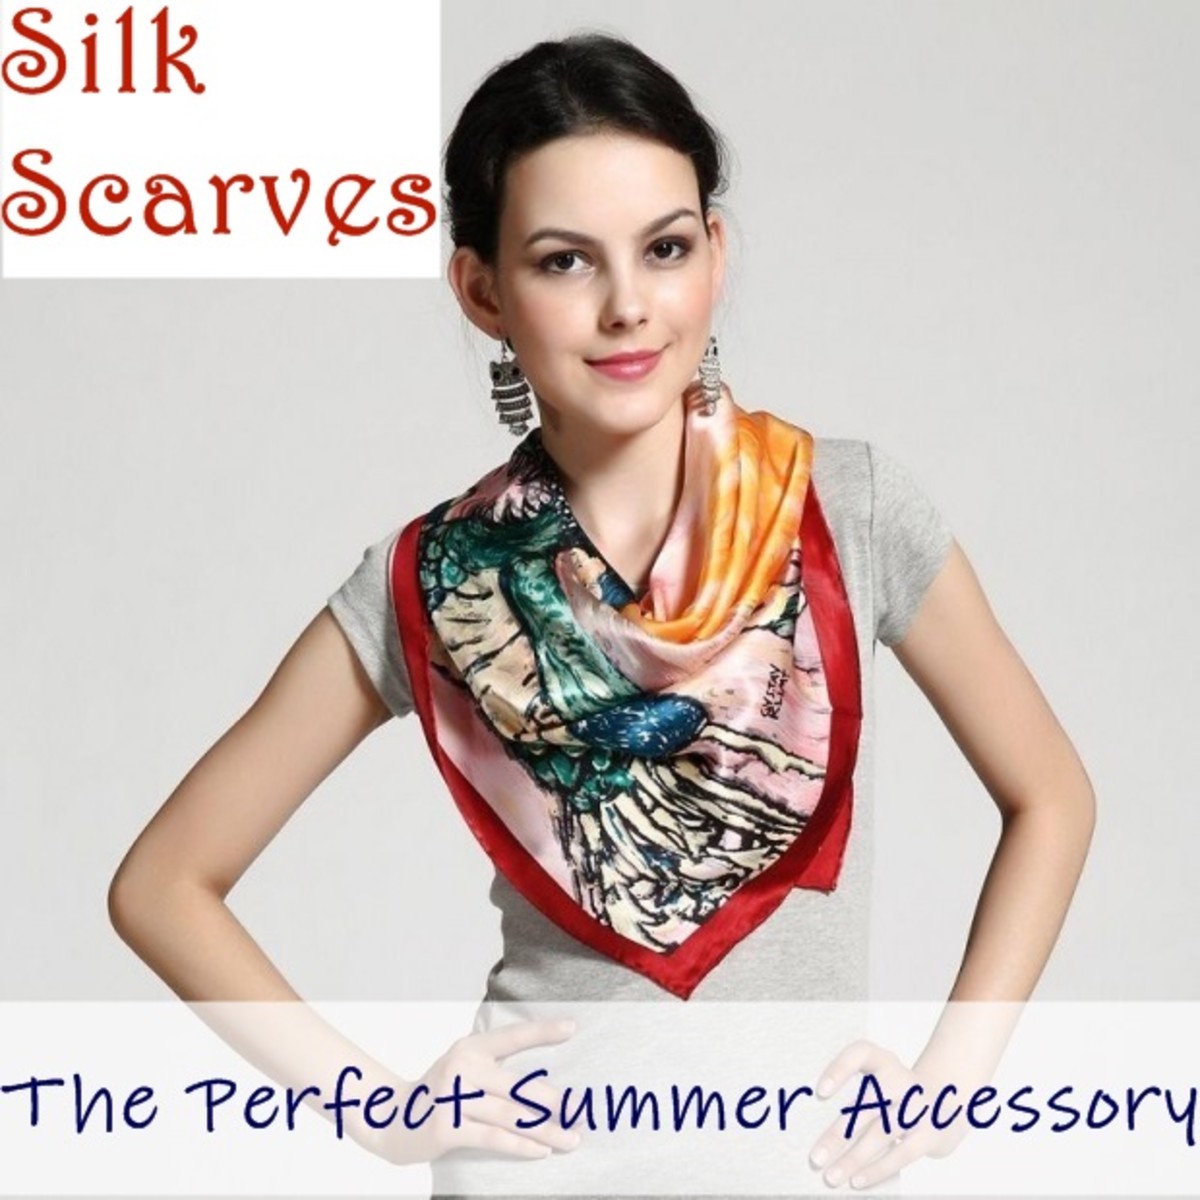 Silk Scarves-The Best Summer Accessory